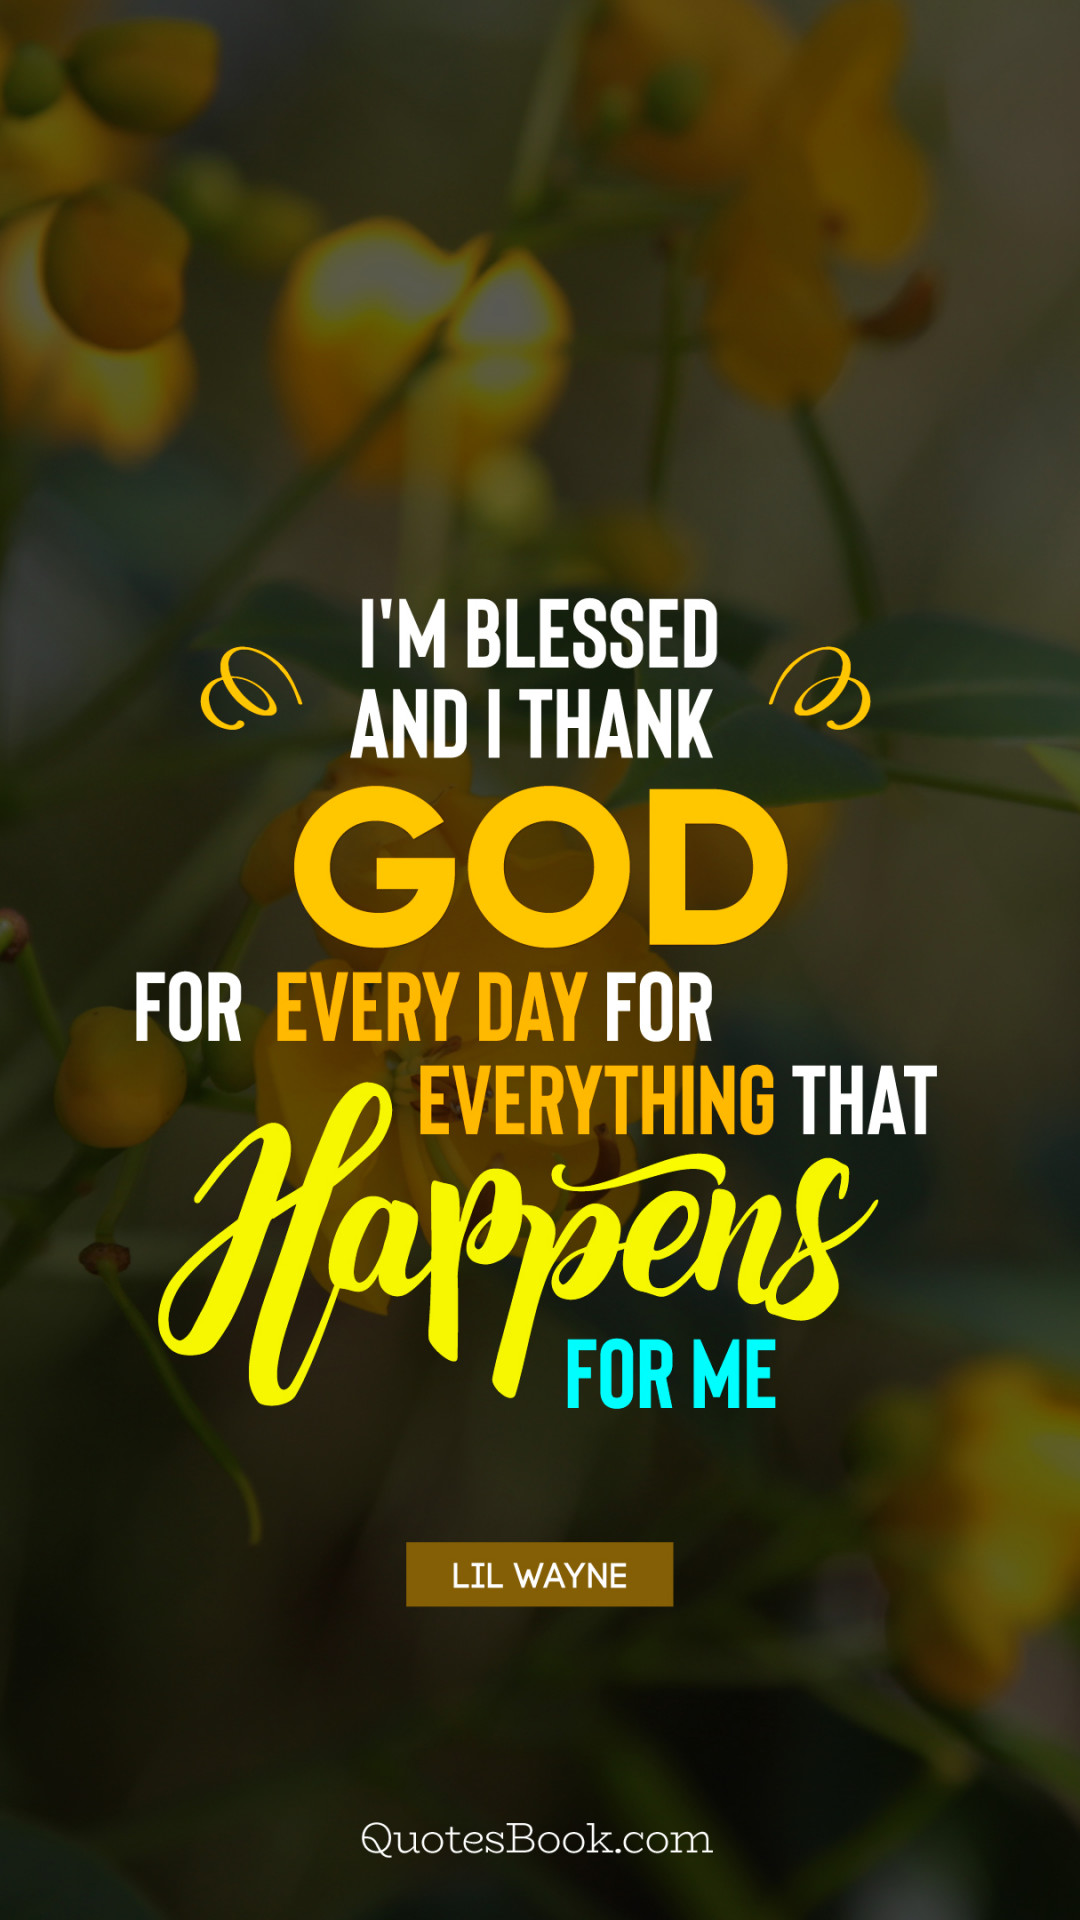 I M Blessed And I Thank God For Every Day For Everything